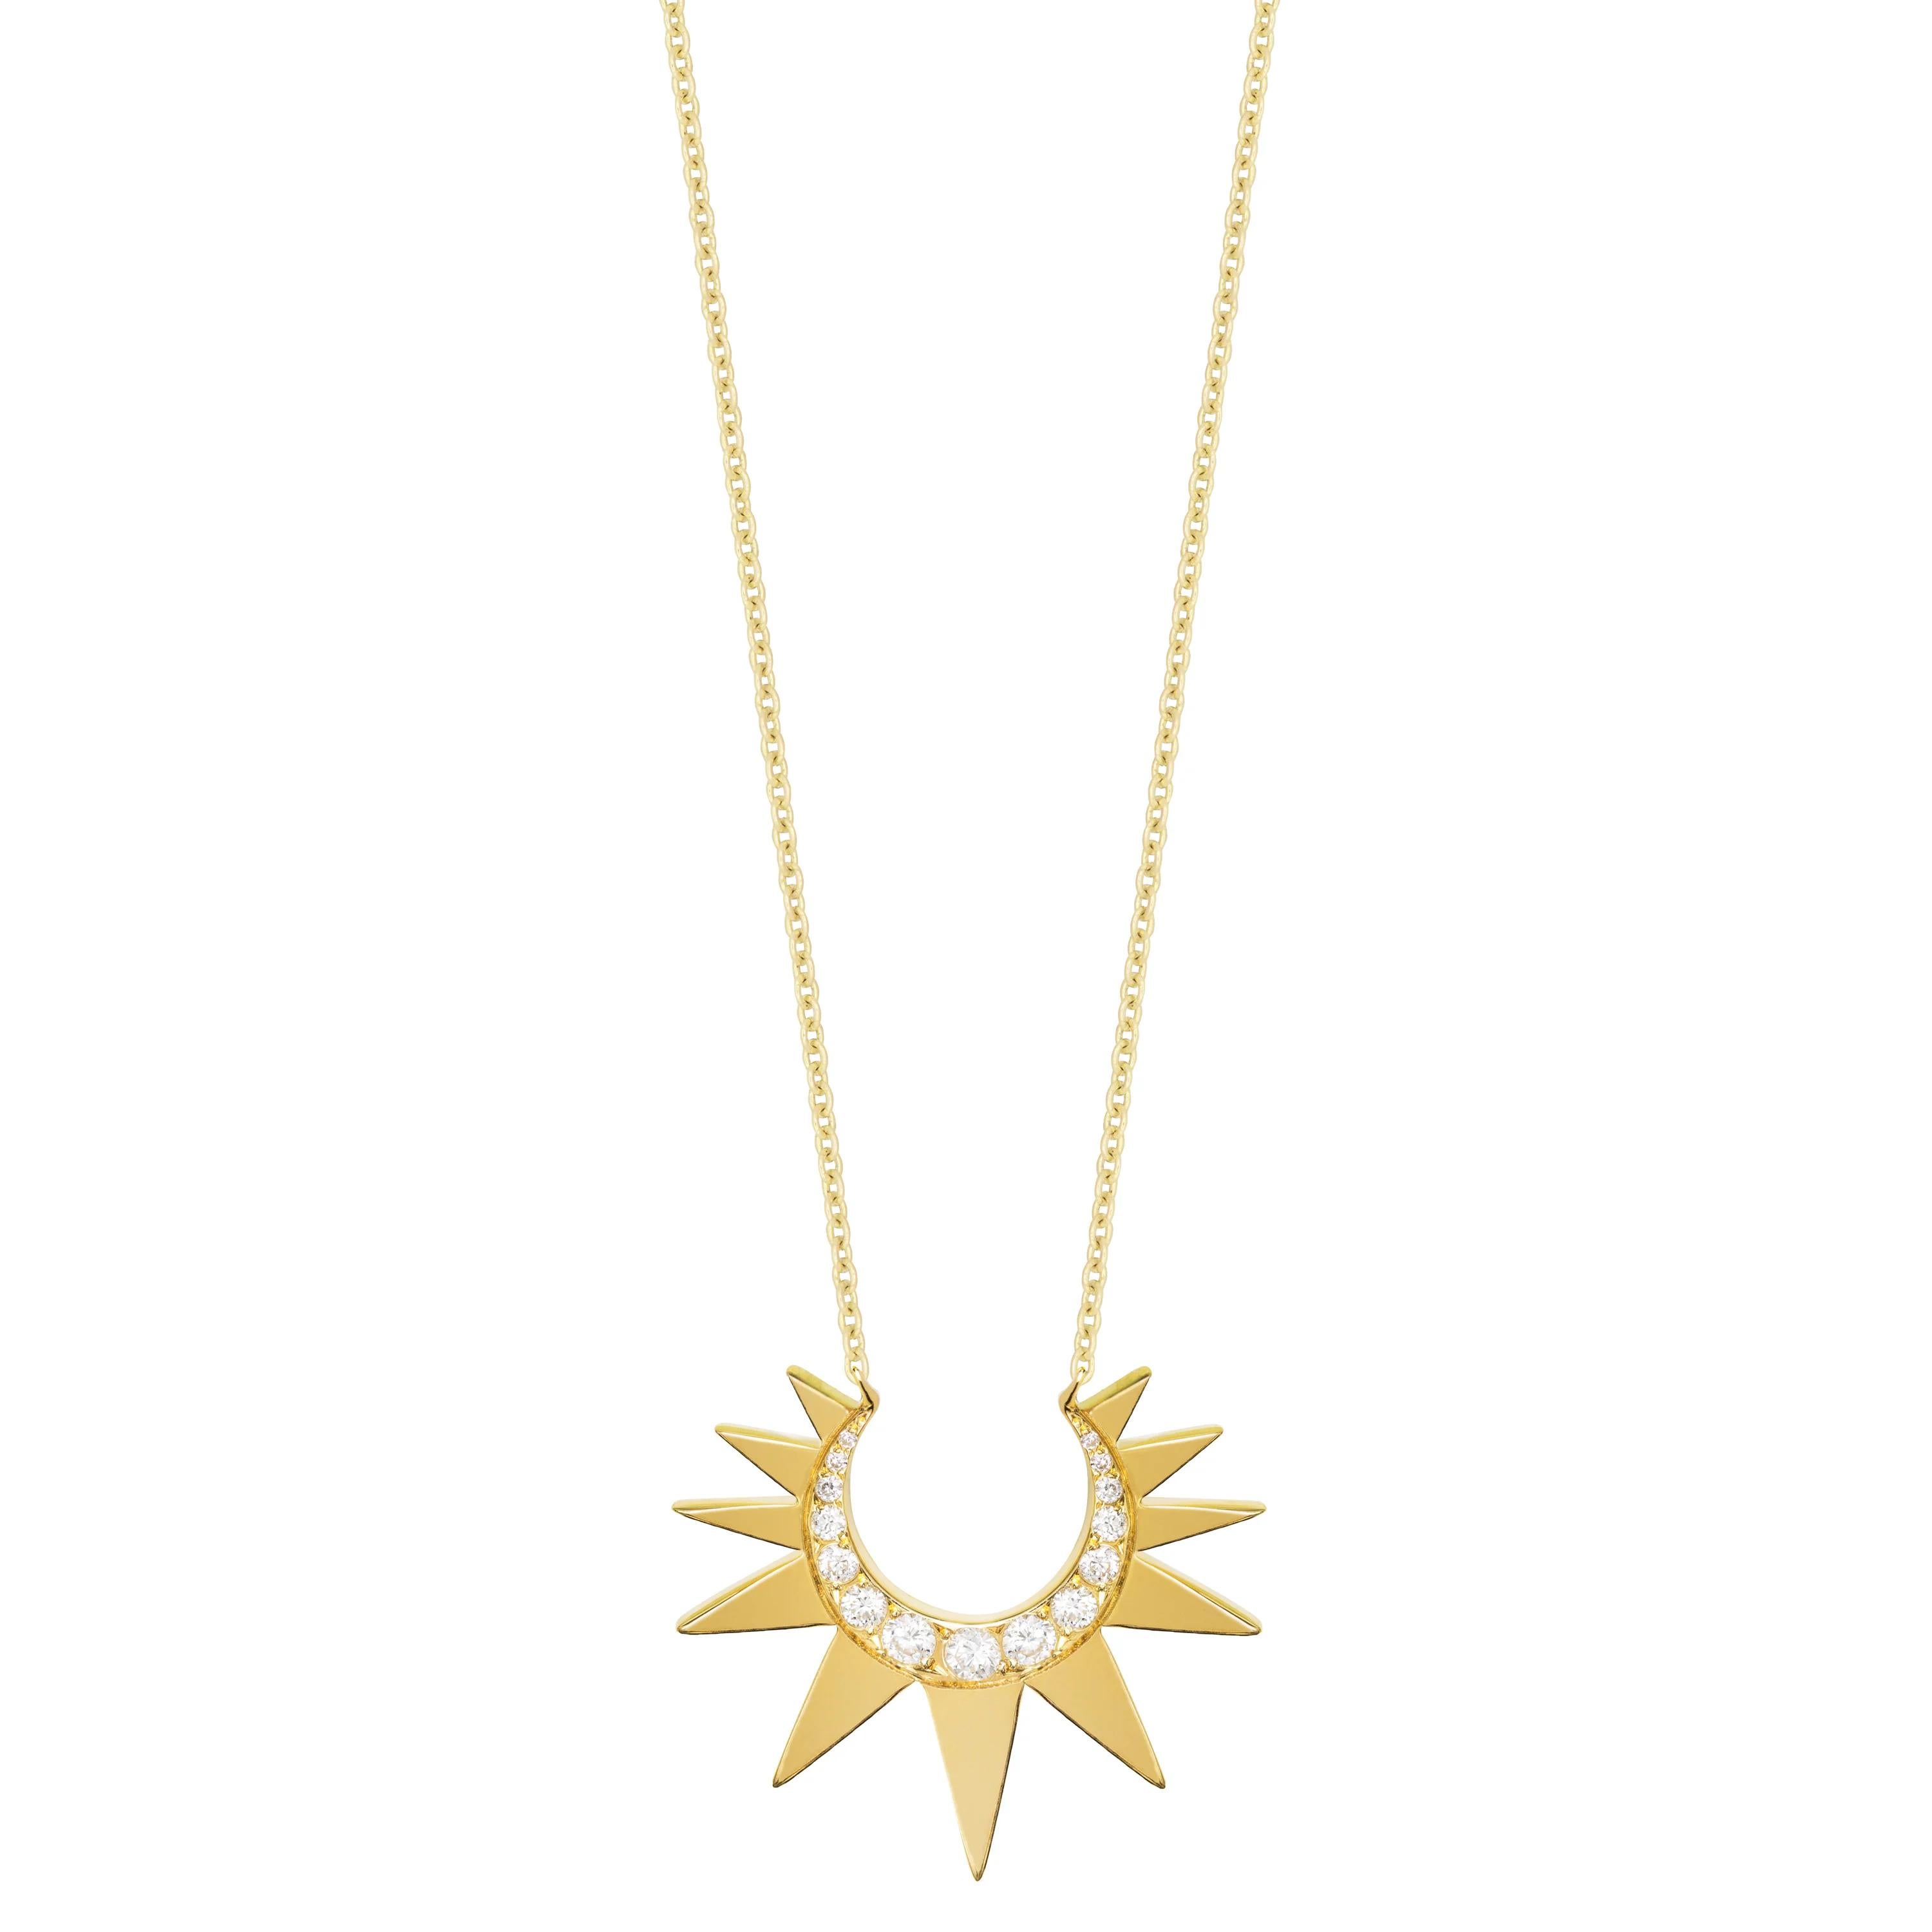 Women's Chain Necklace with Small Diamond Crescent Sun For Sale